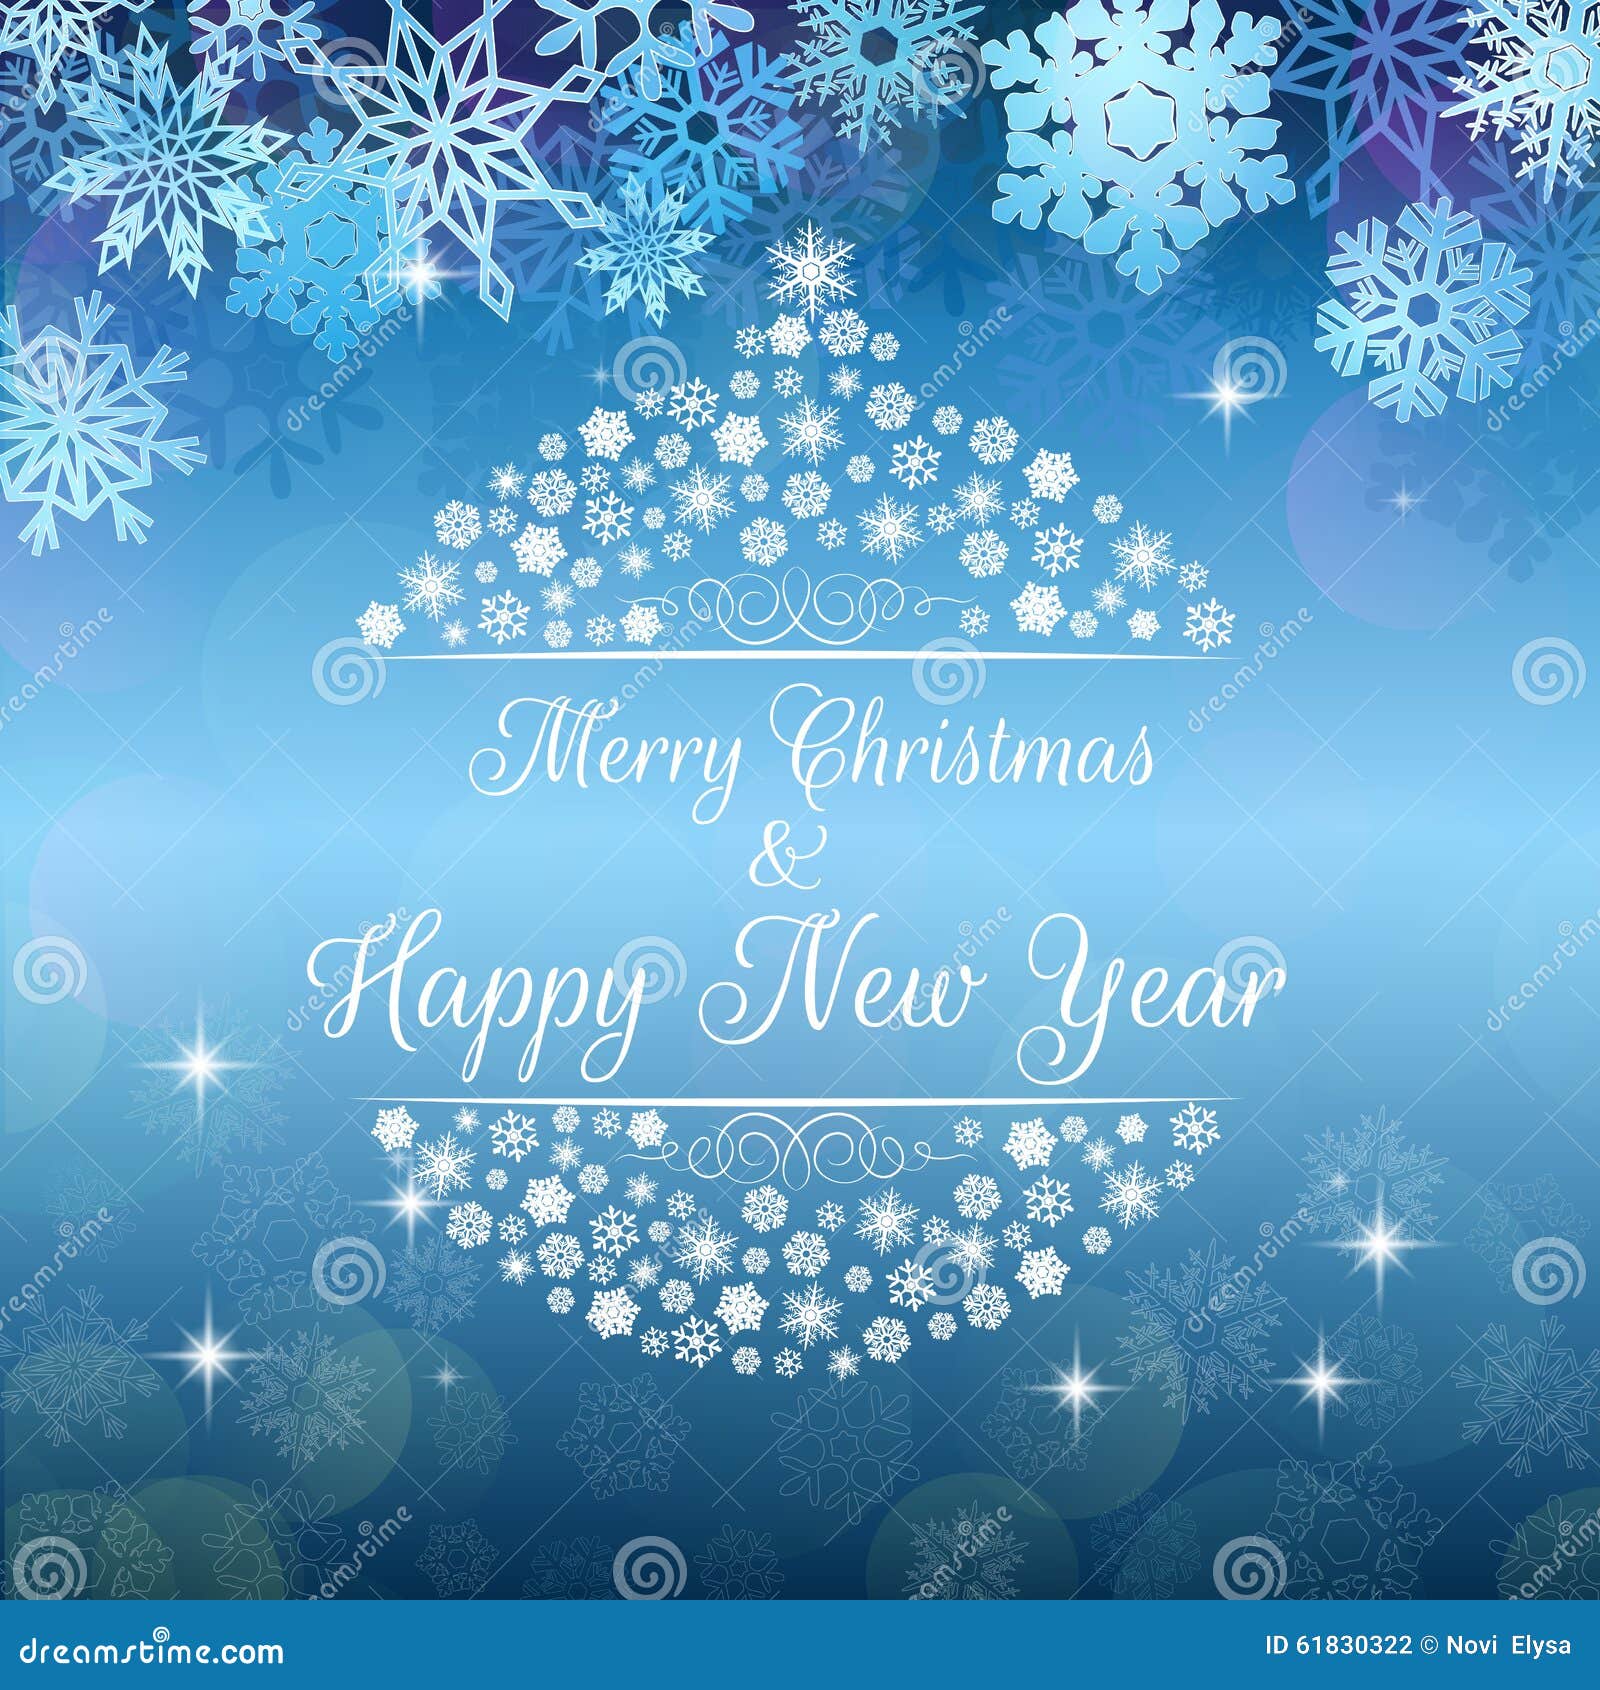 Merry Christmas and Happy New Year Background Banner Stock Vector ...